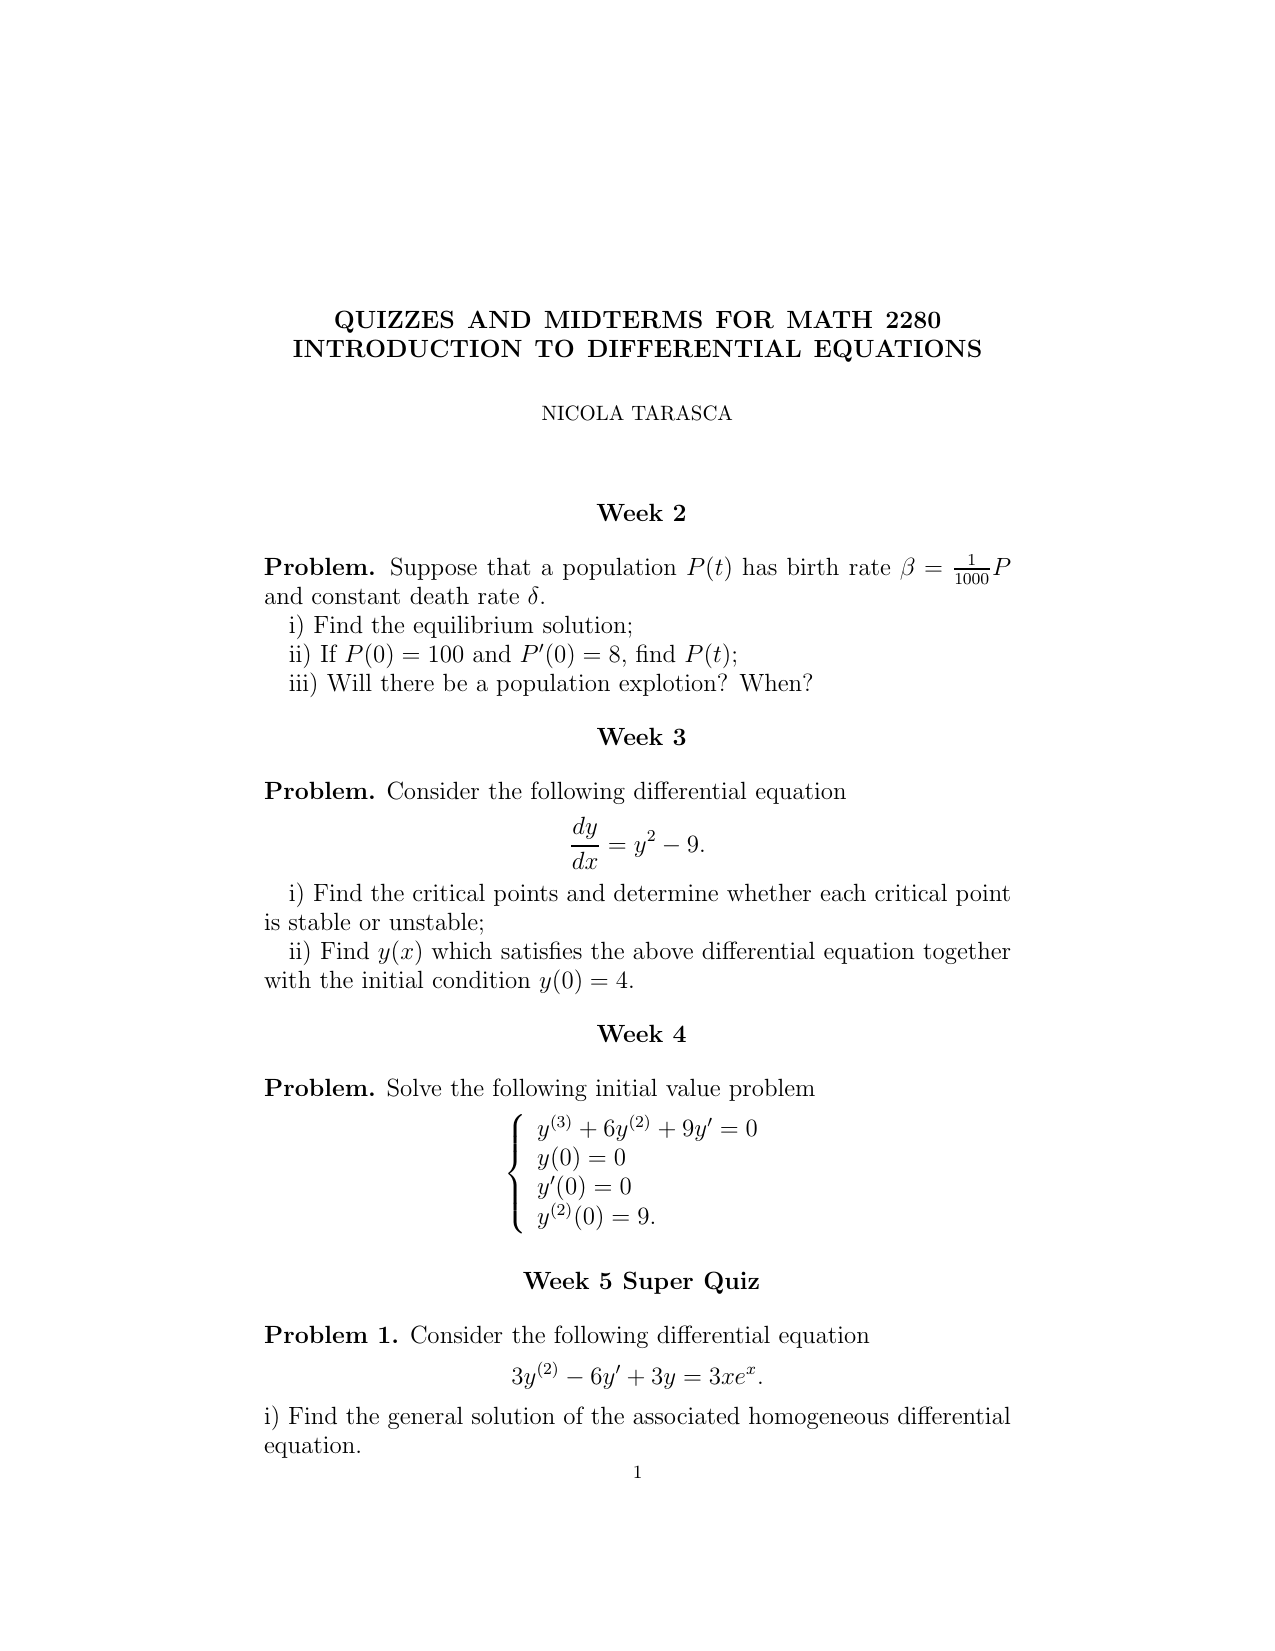 Quizzes And Midterms For Math 2280 Introduction To Differential Equations Week 2